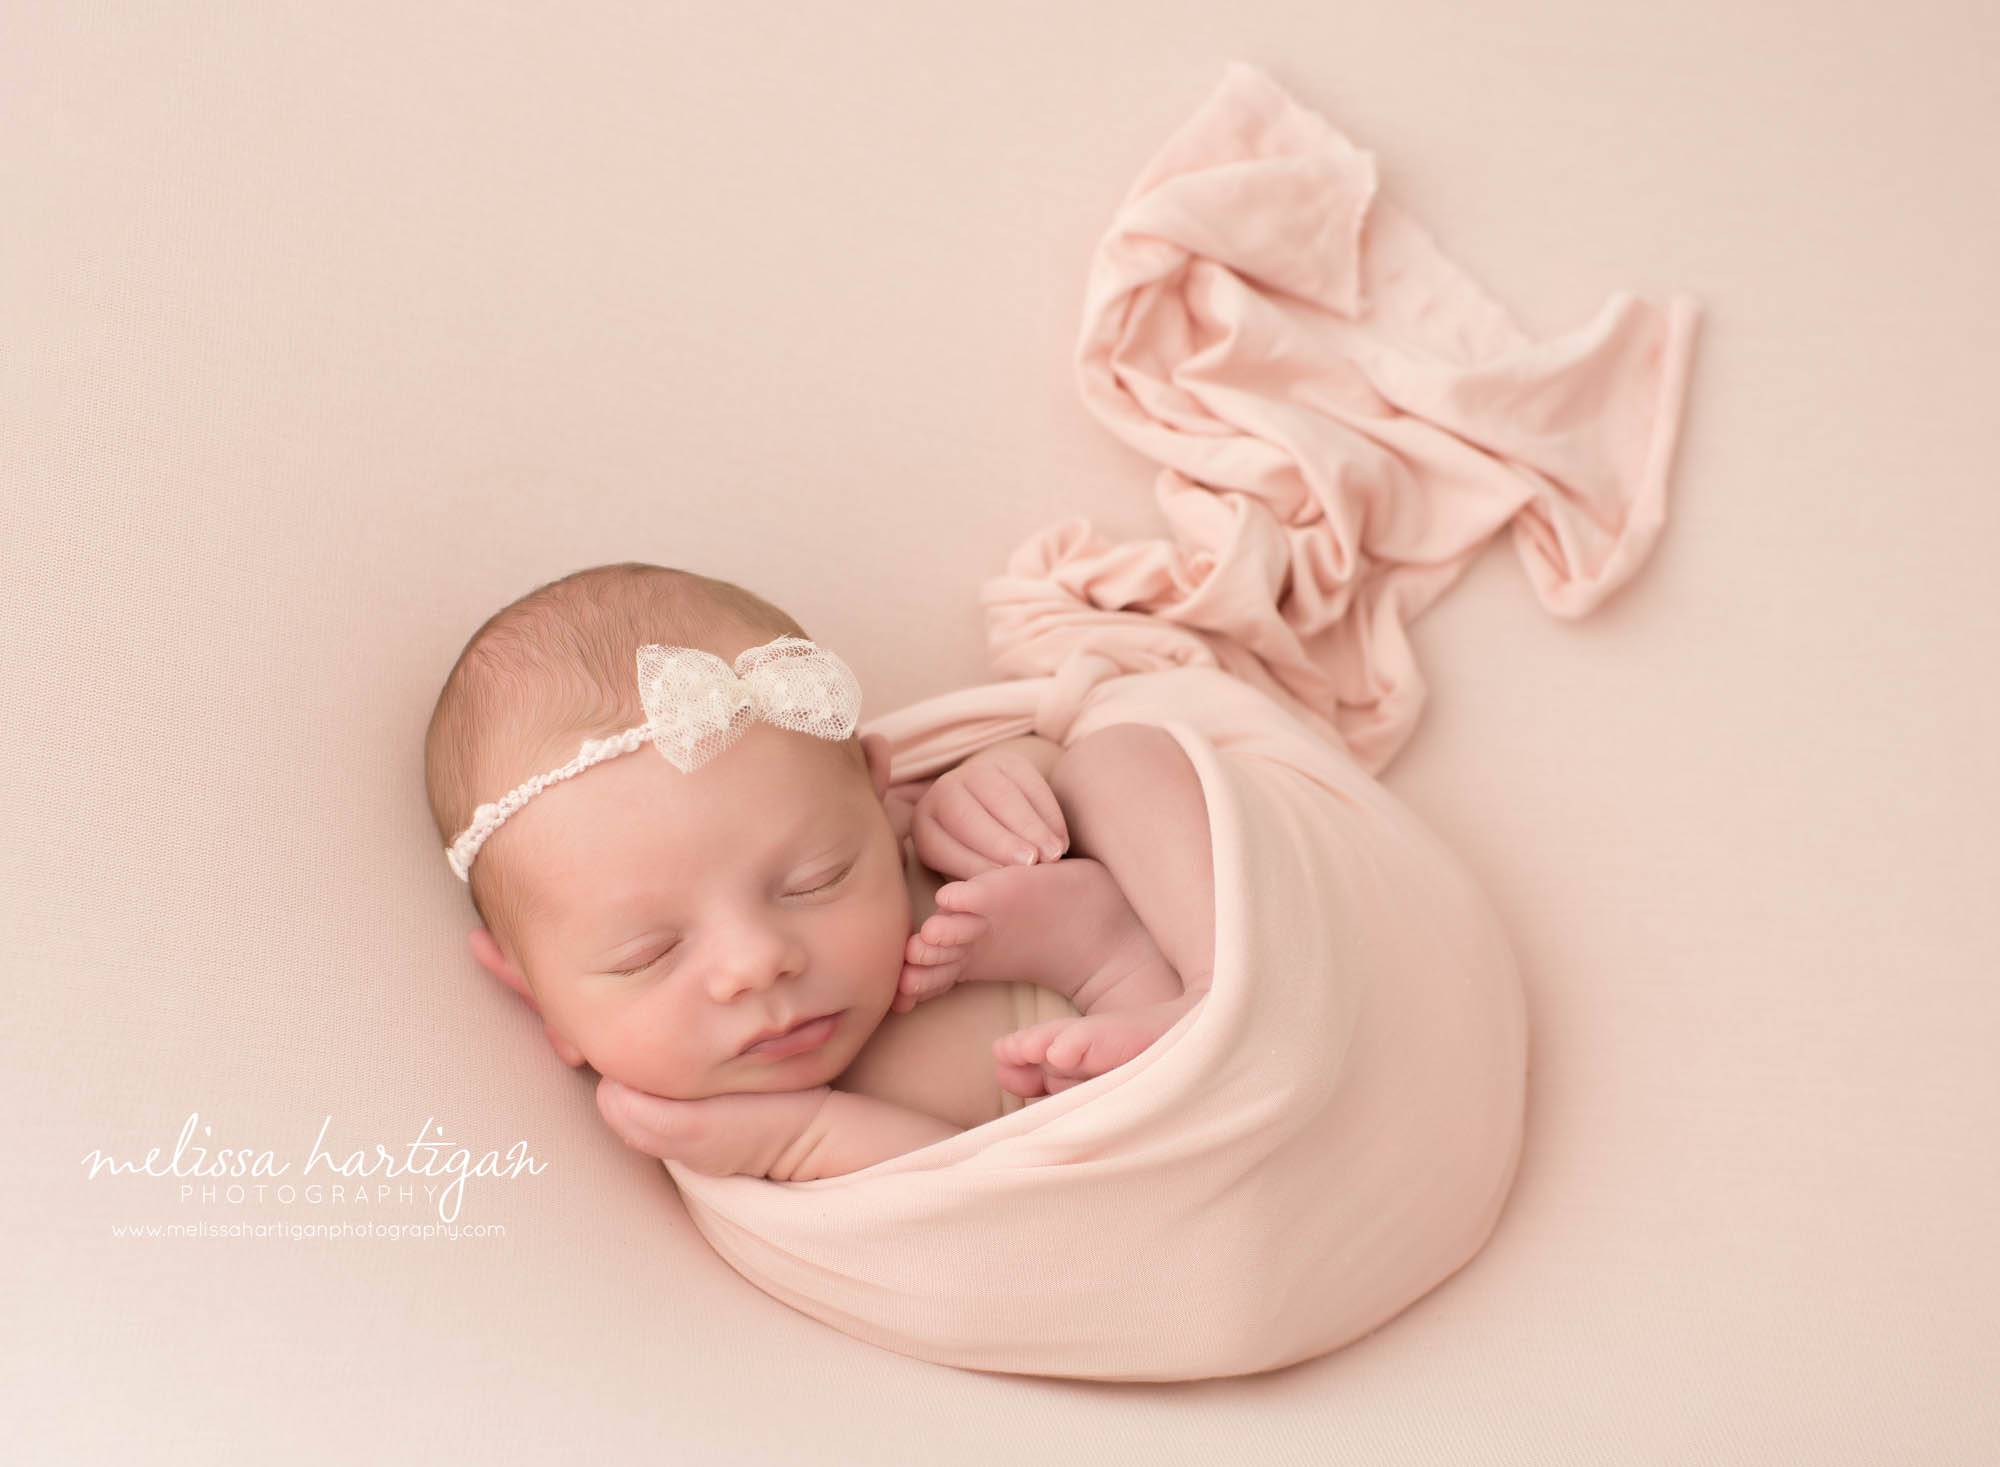 newborn baby girl posed on blush pink backdrop wraped in matching layer wrap wearing cream white bow headband ct new born photography connecticut